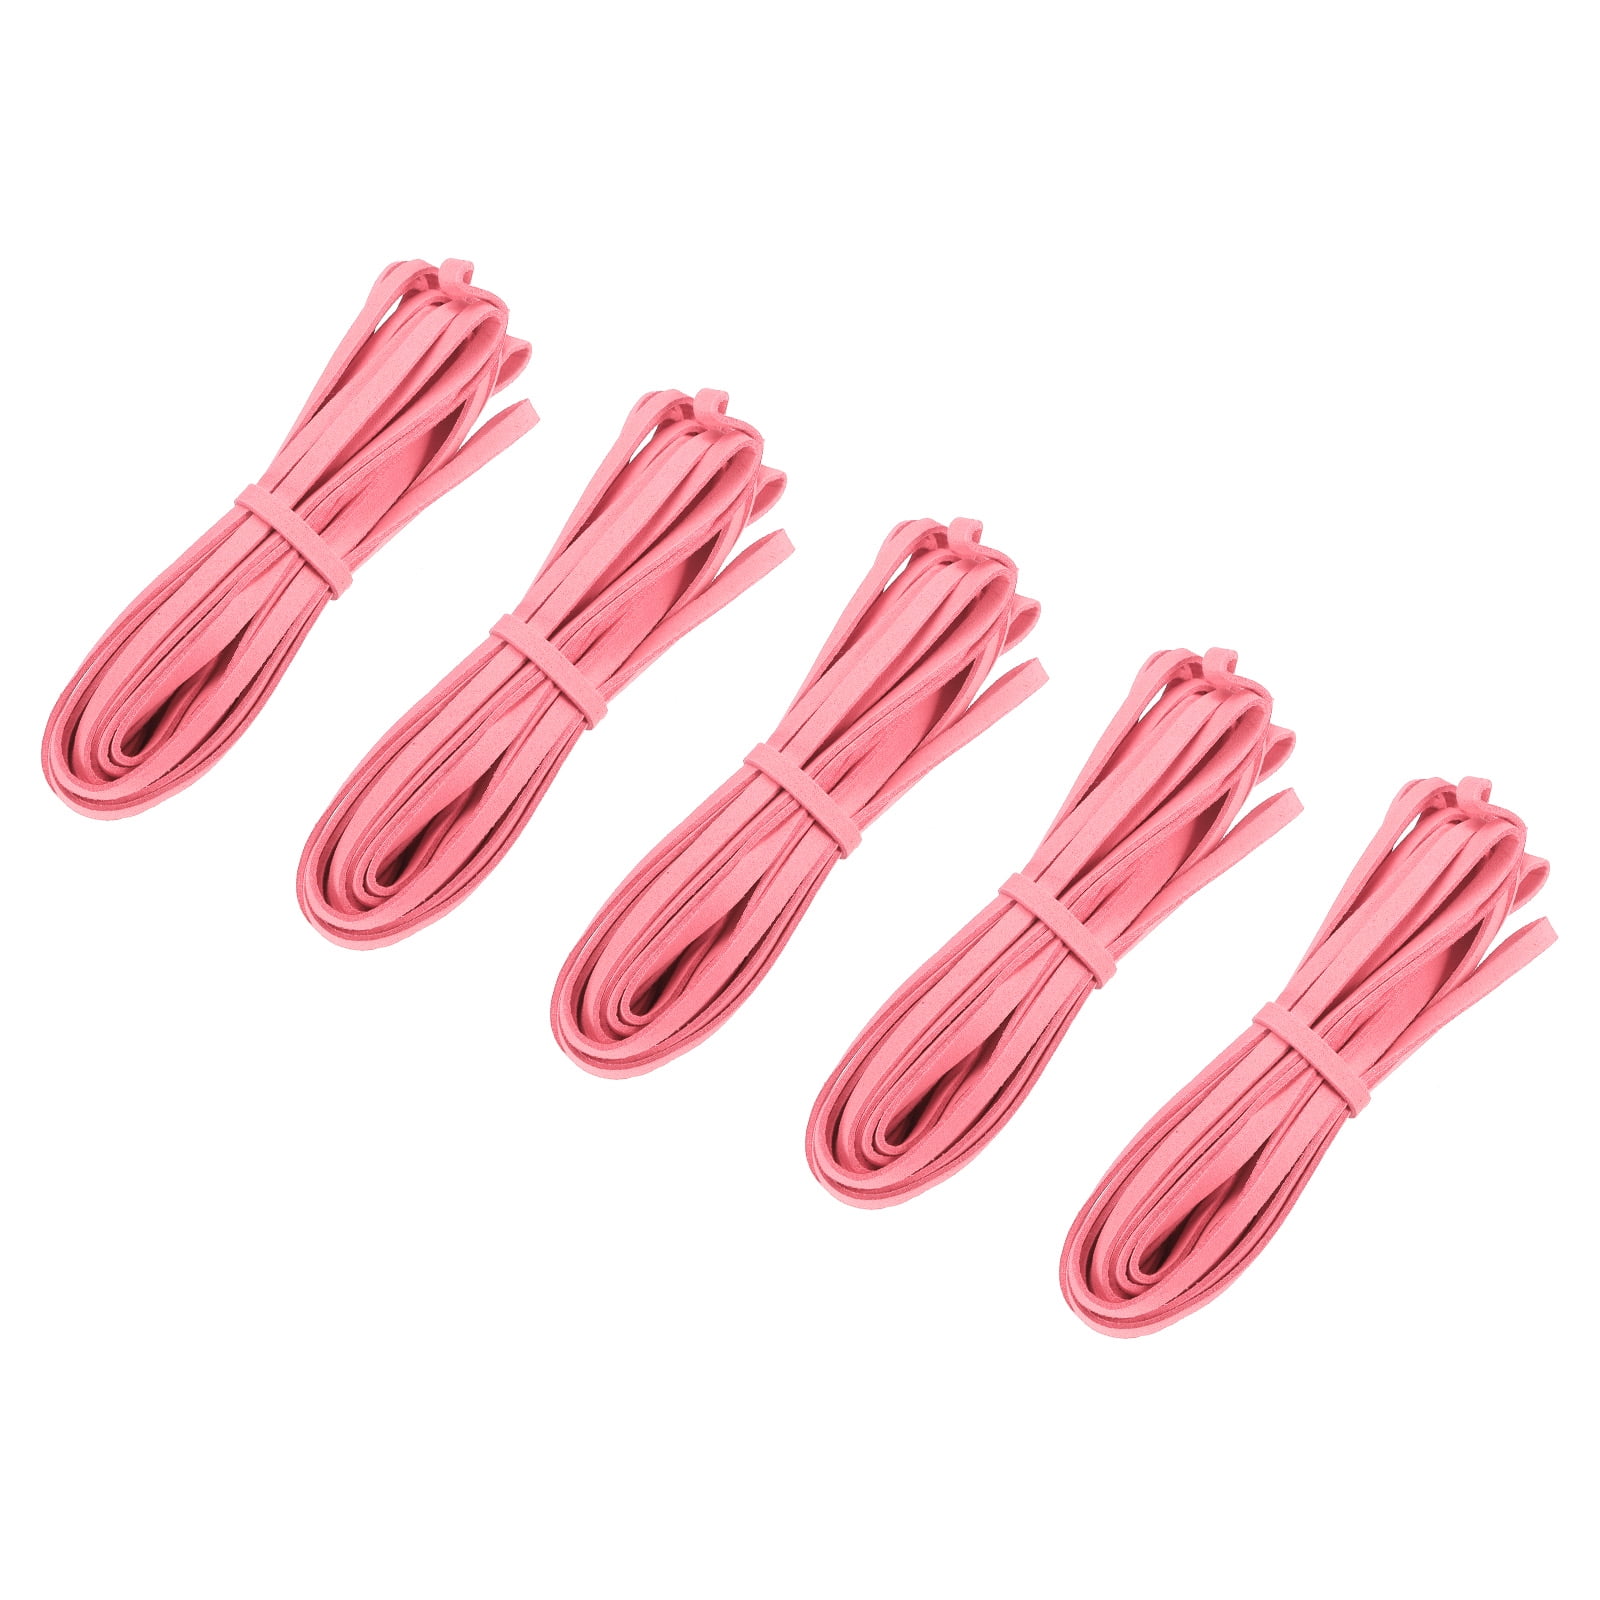 Uxcell 5.47 Yards 5mm Flat Suede Cord Leather String for DIY Crafts, Light  Pink 5Pcs 